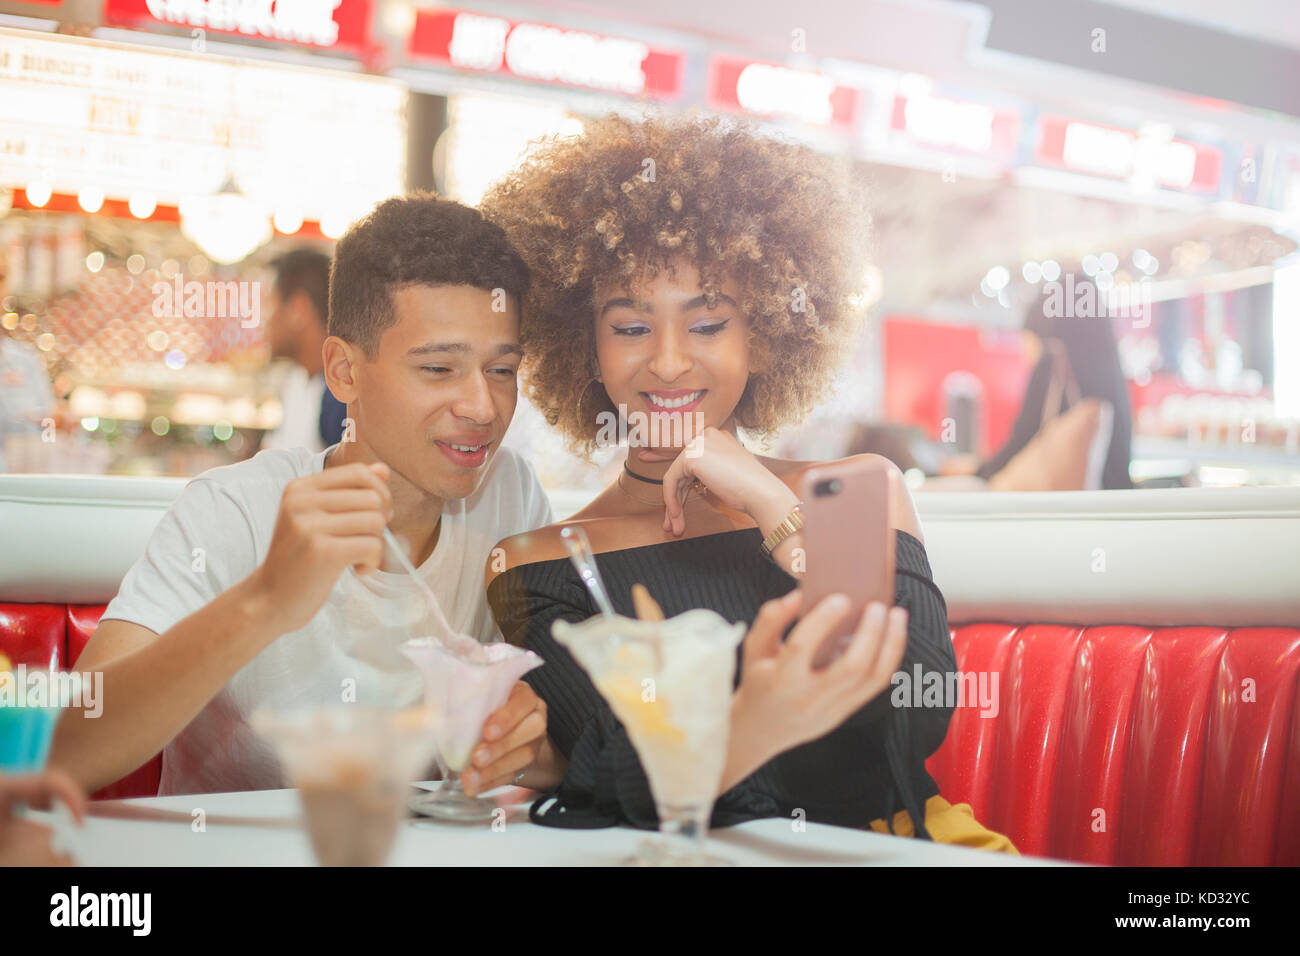 Young couple sitting in diner, looking at smartphone, rire Banque D'Images